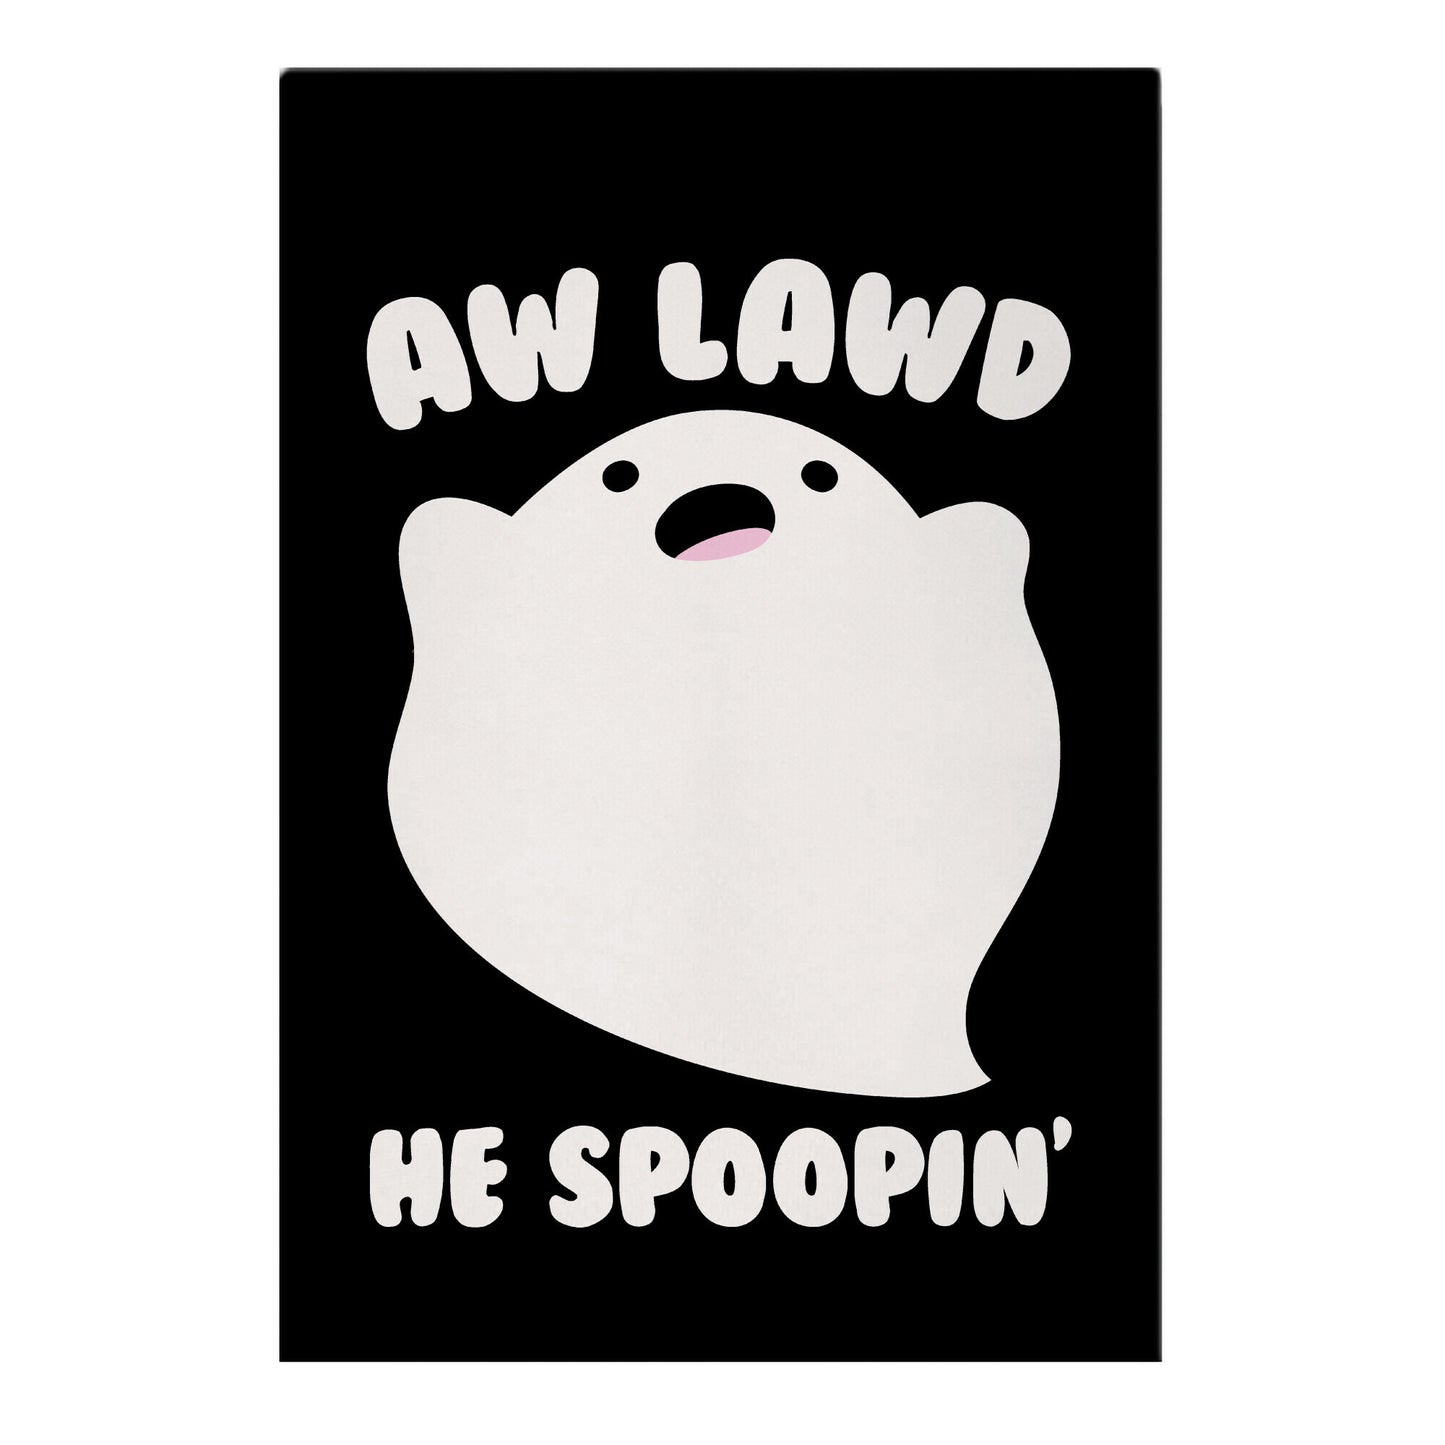 Aw Lawd He Spoopin' Ghost Parody White Print Garden Flag